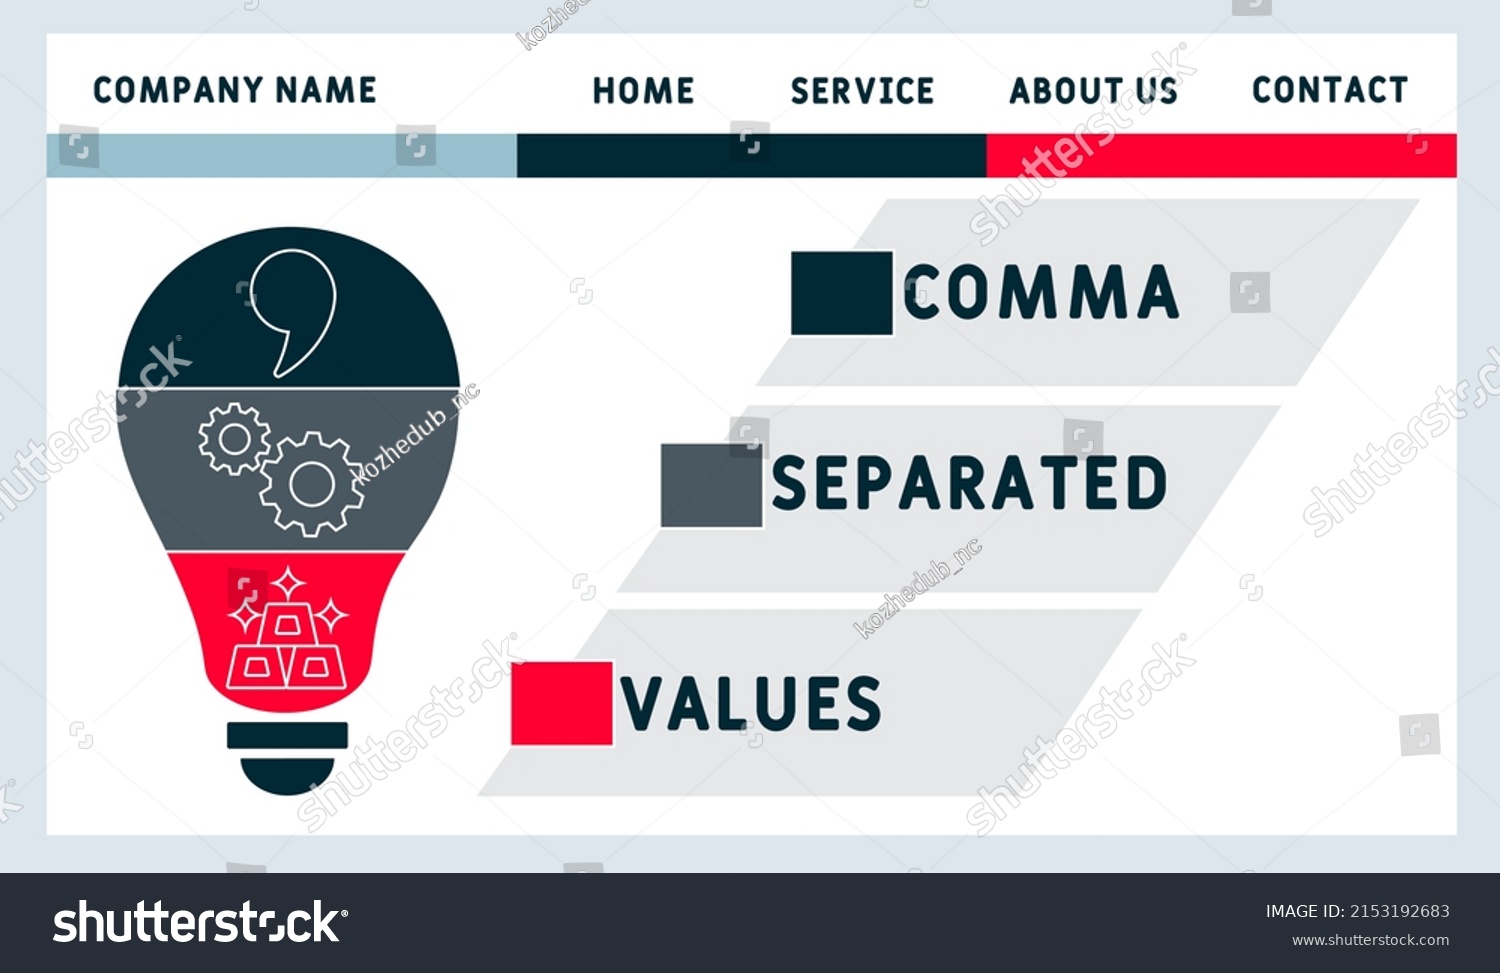 Csv Comma Separated Values Acronym Business Stock Vector Royalty Free 2153192683 Shutterstock 9880